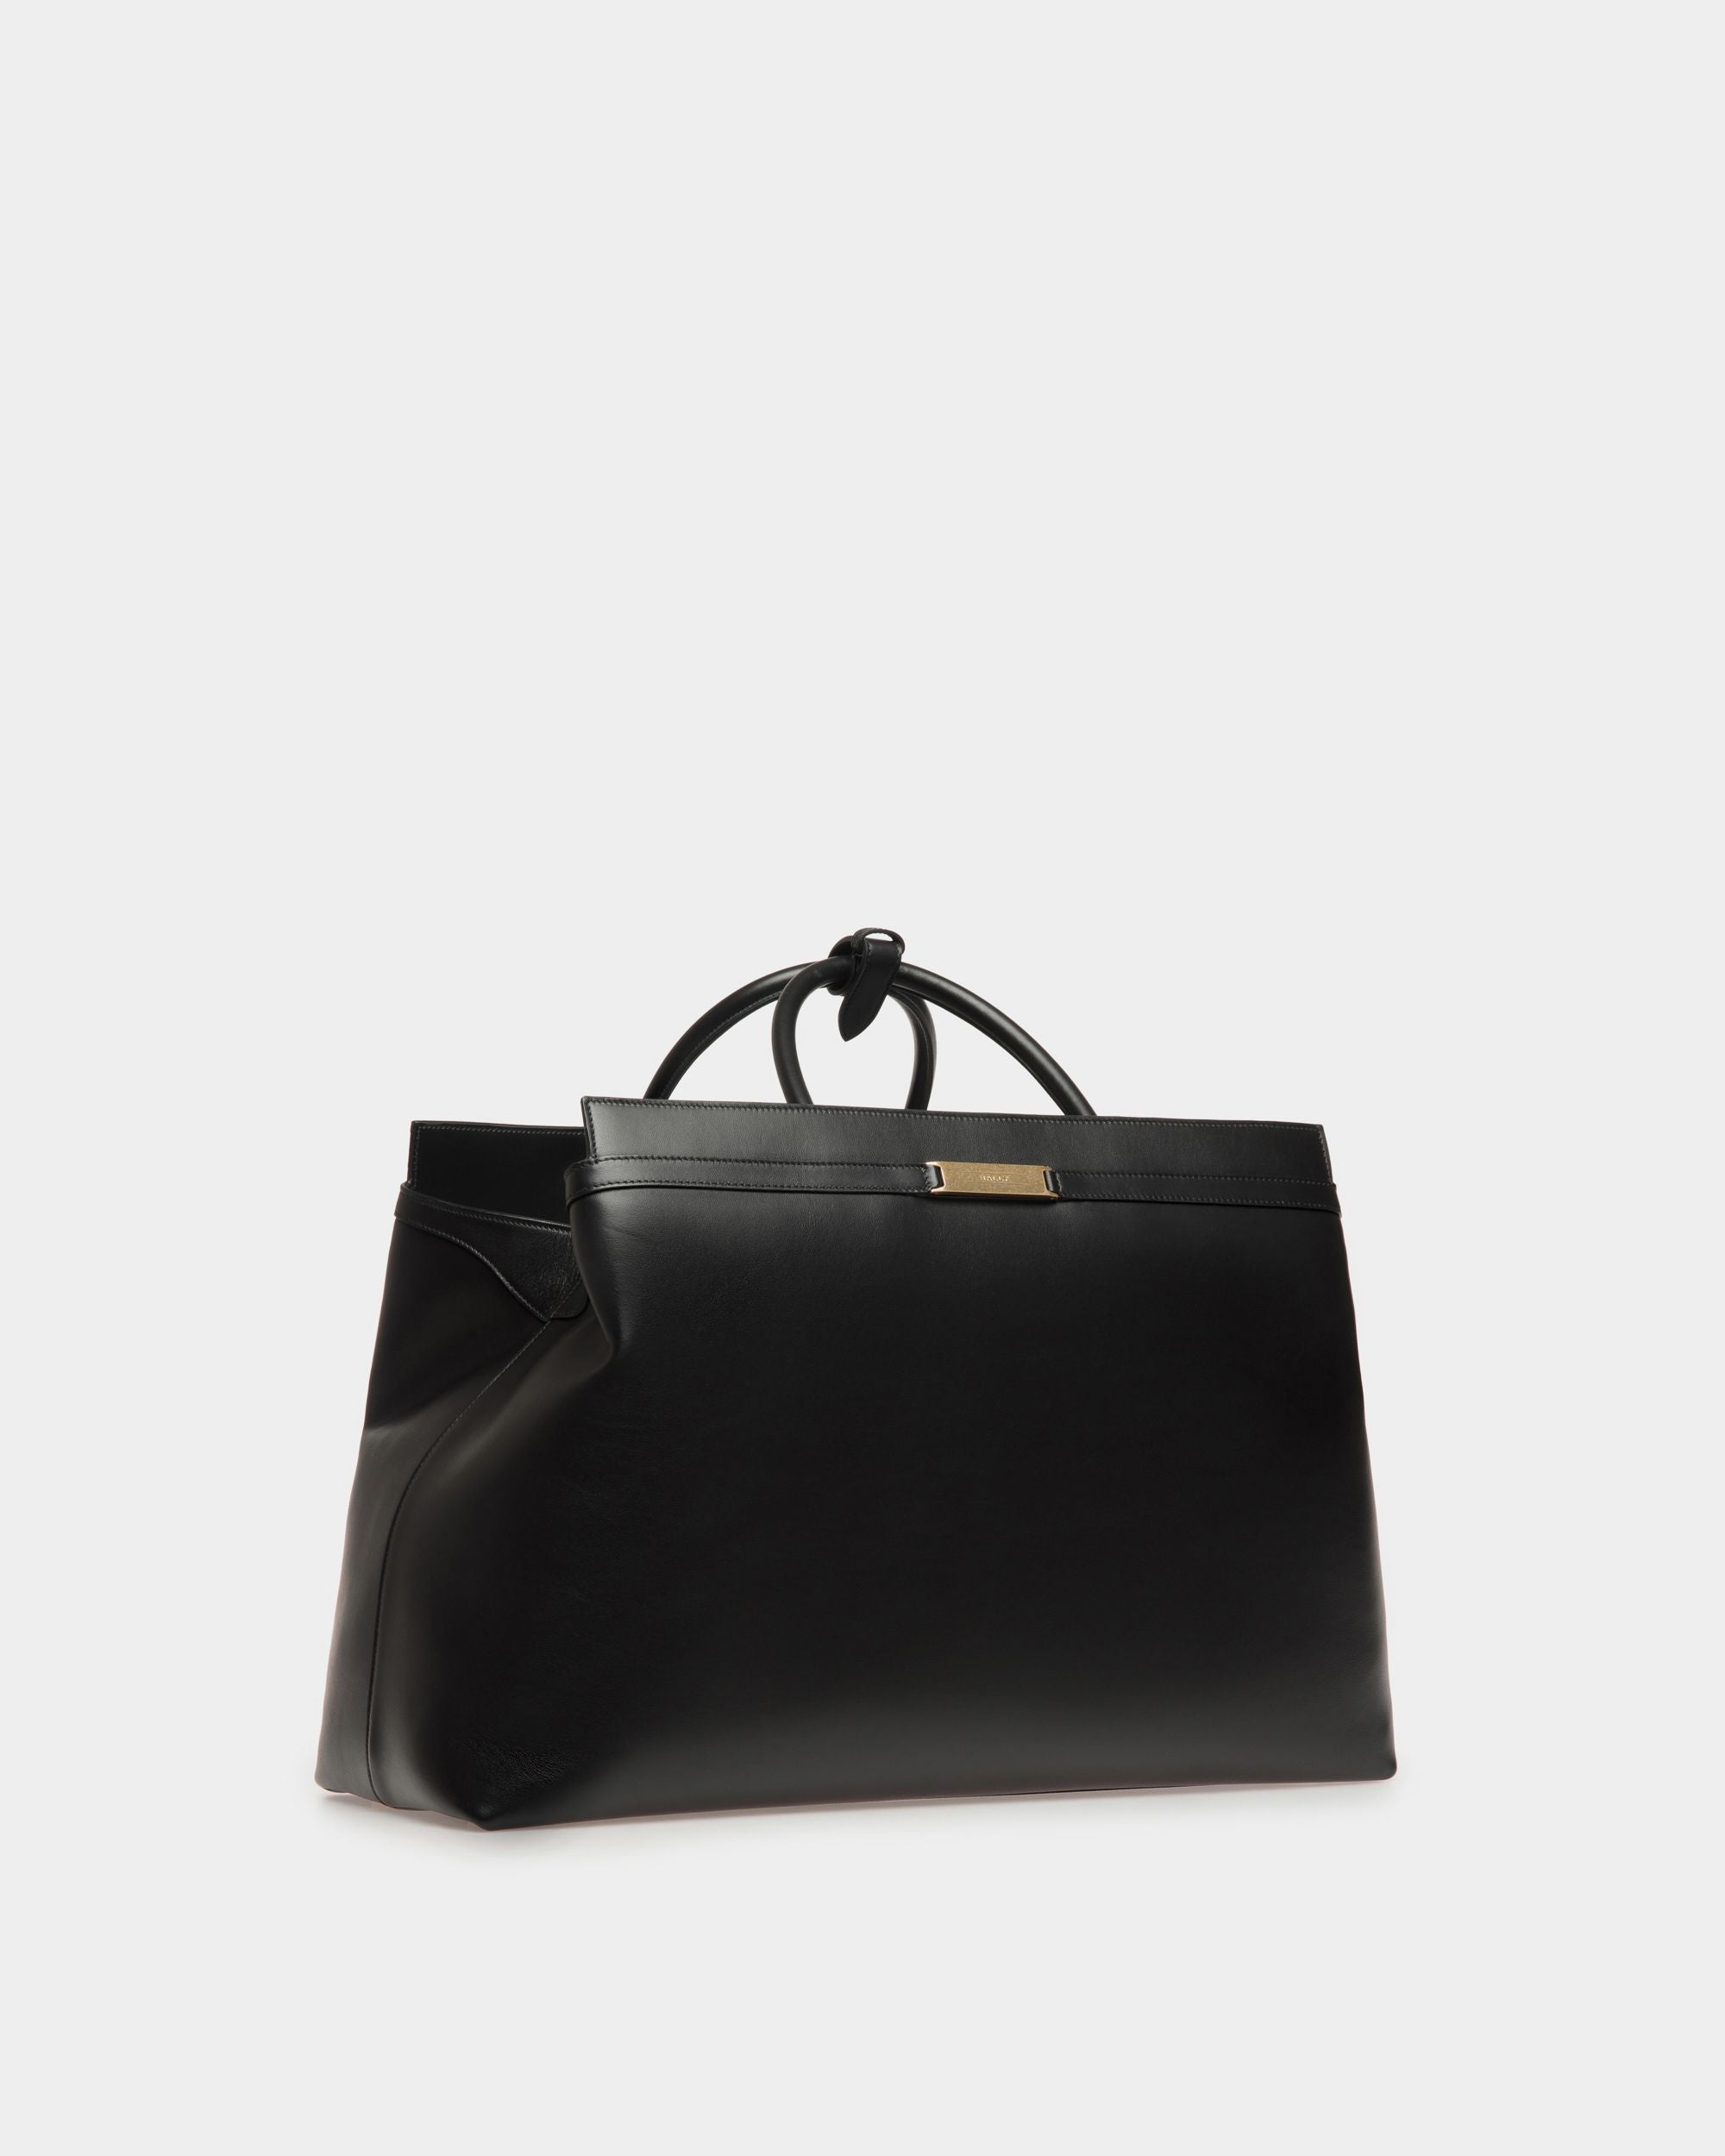 Deco | Men's Weekender in Black Leather | Bally | Still Life 3/4 Front